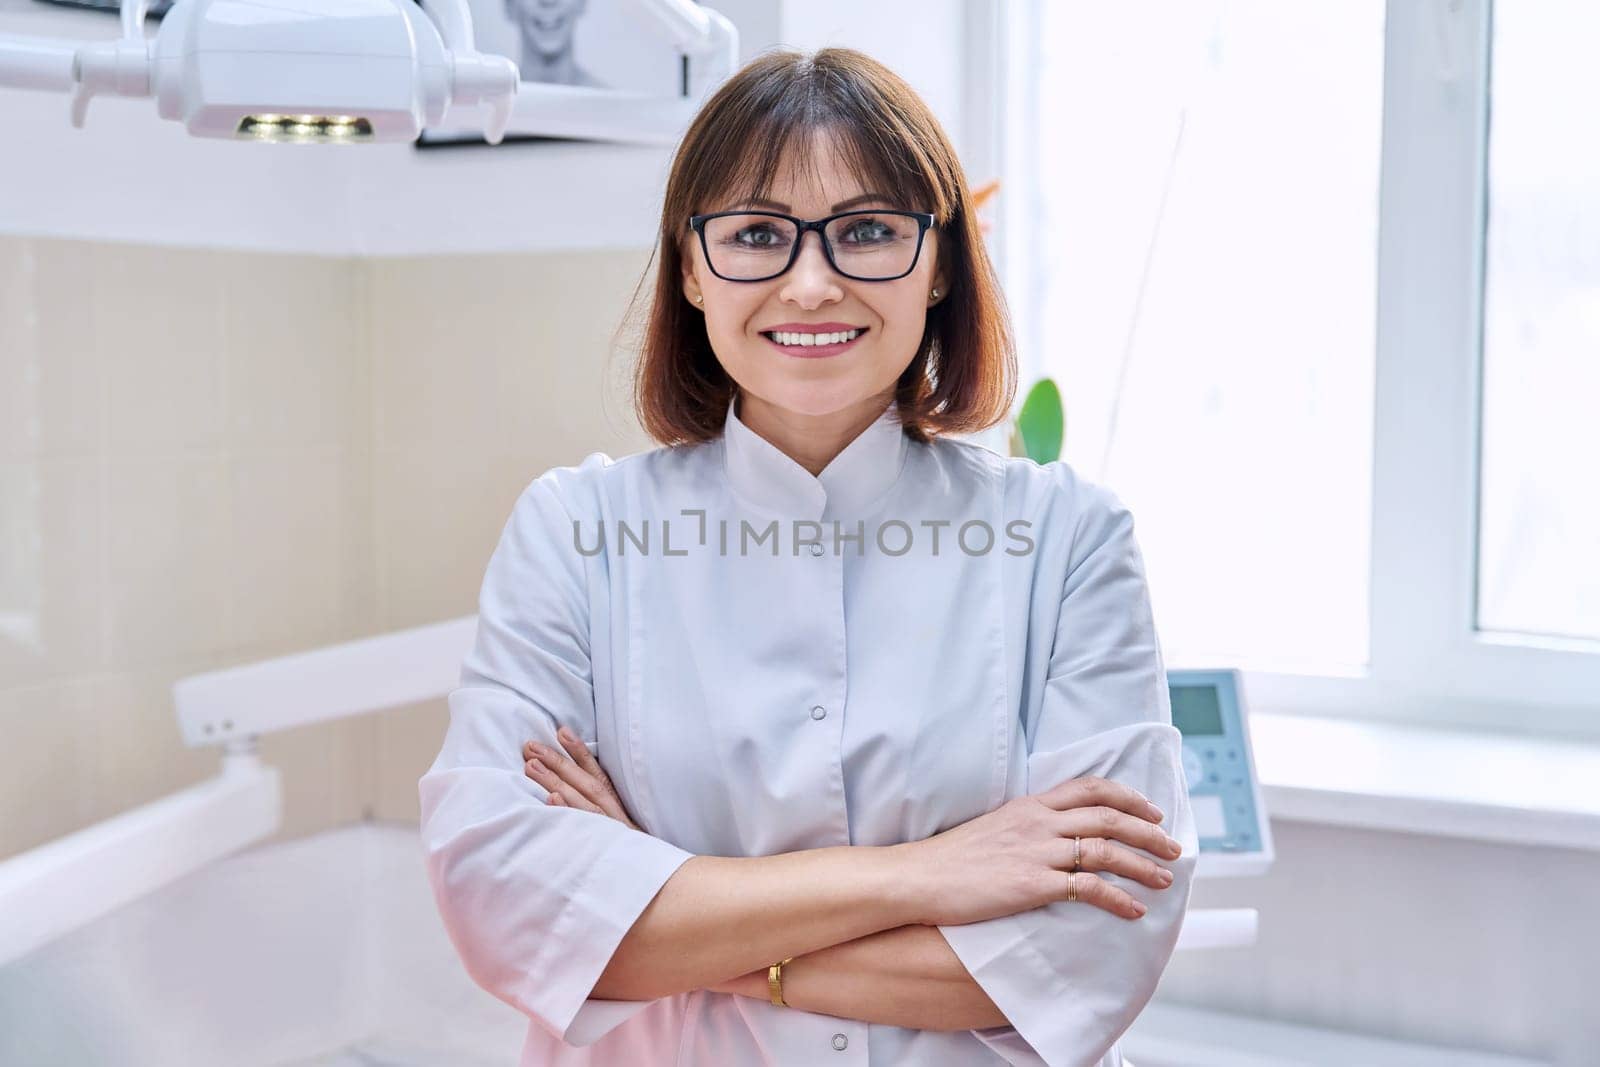 Portrait of smiling mature female dentist looking at camera in office. Confident doctor with crossed arms in clinic. Dentistry, medicine, health care, profession, stomatology concept